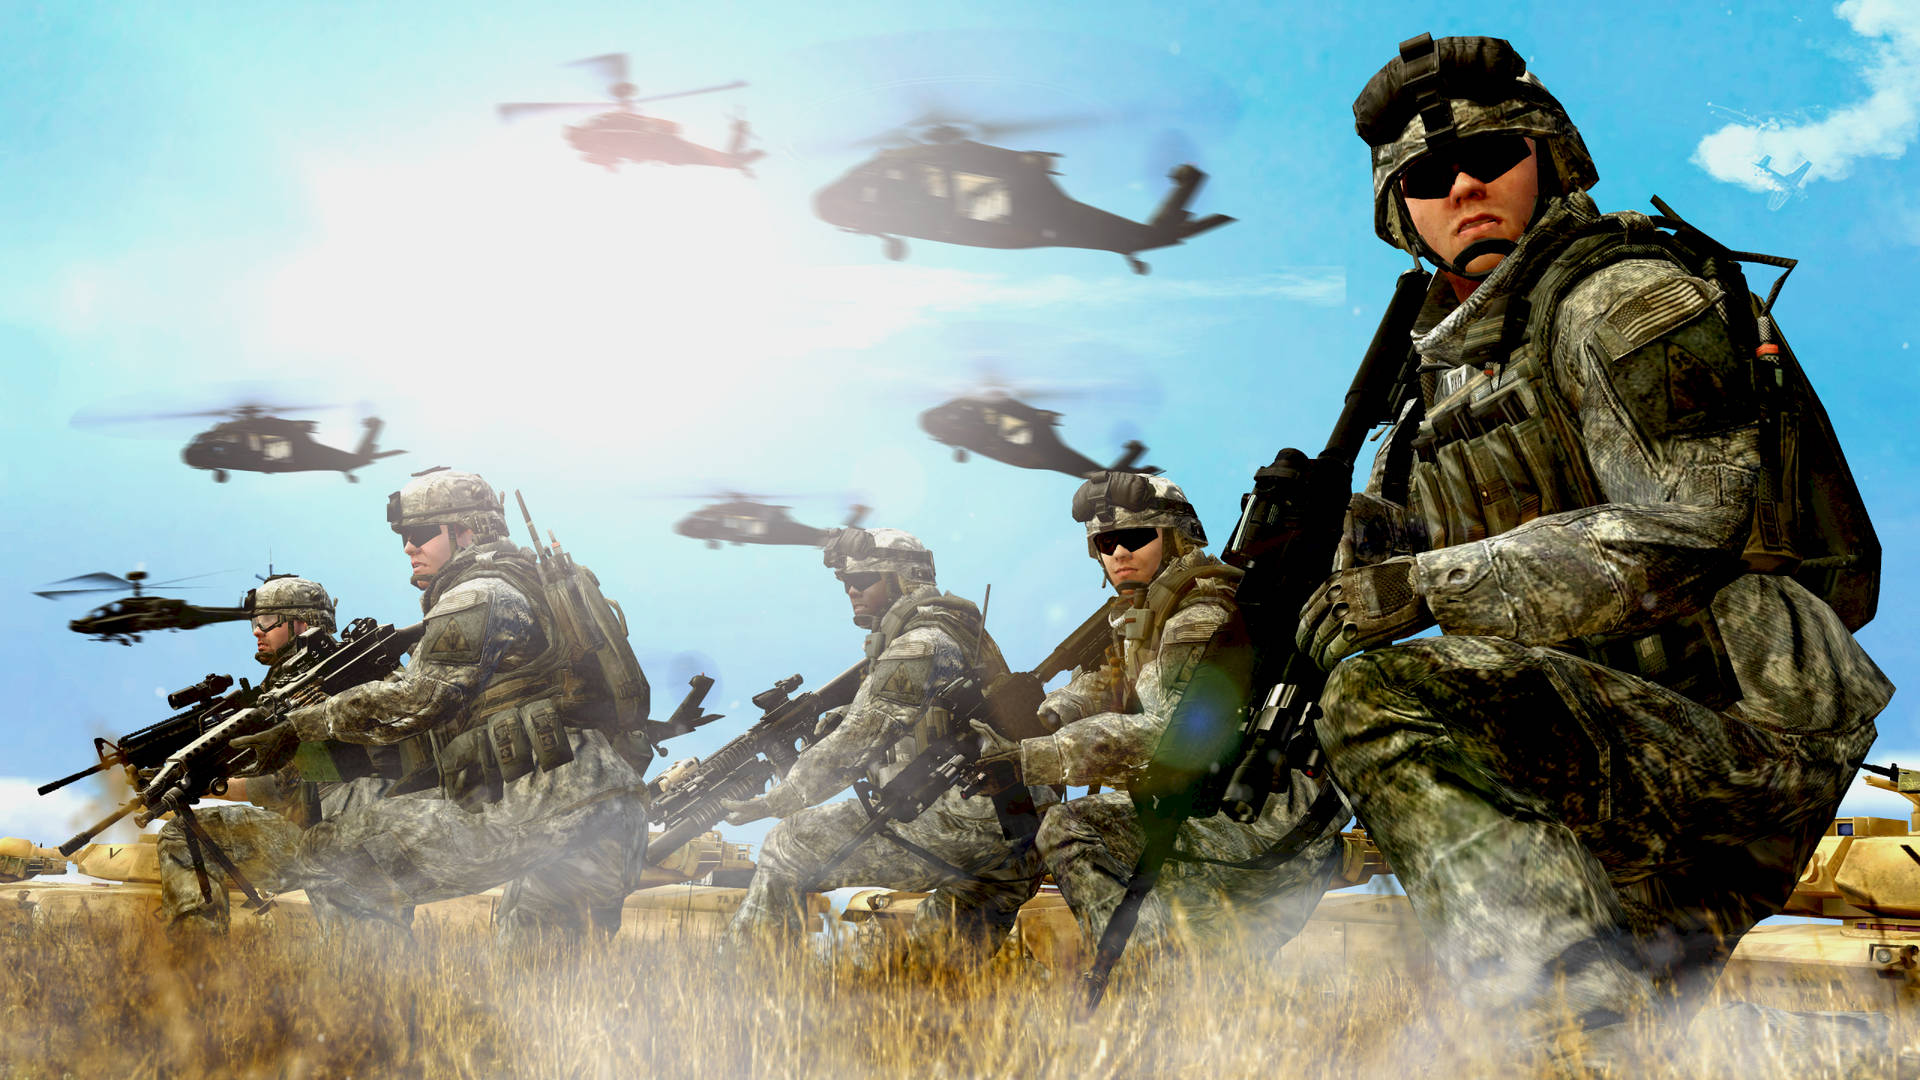 Realistic Lead Soldiers In Action Wallpaper